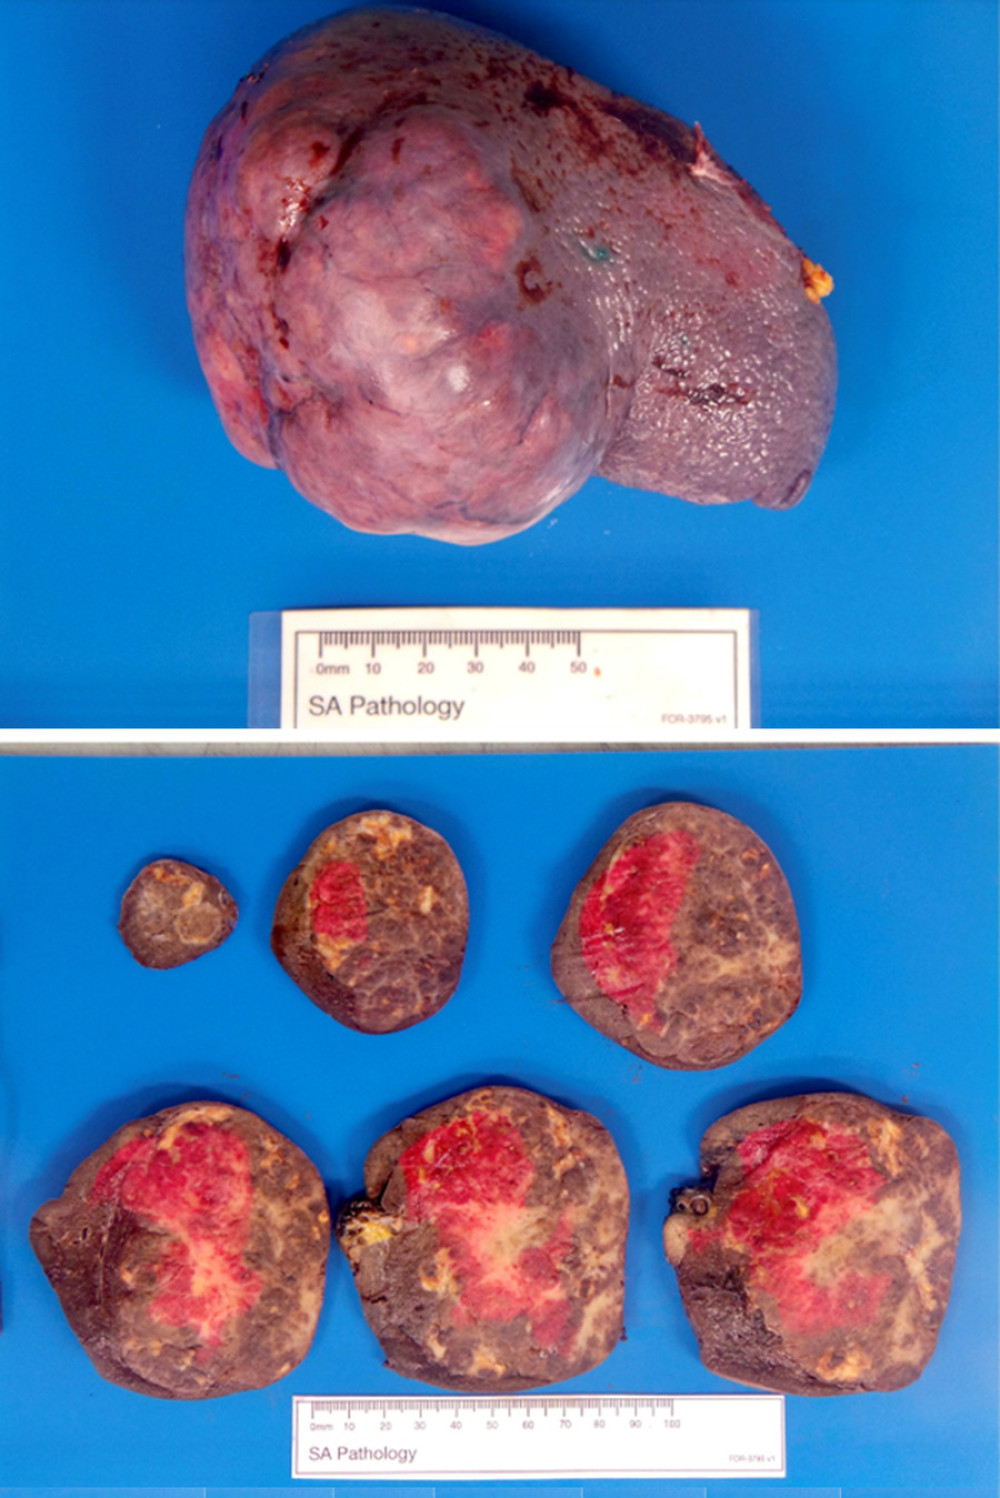 An 80-mm bosselated lesion was seen in the superior pole of the spleen, with intact overlying capsule. The cut surface showed a well-demarcated but encapsulated nodular lesion with areas of sclerosis.